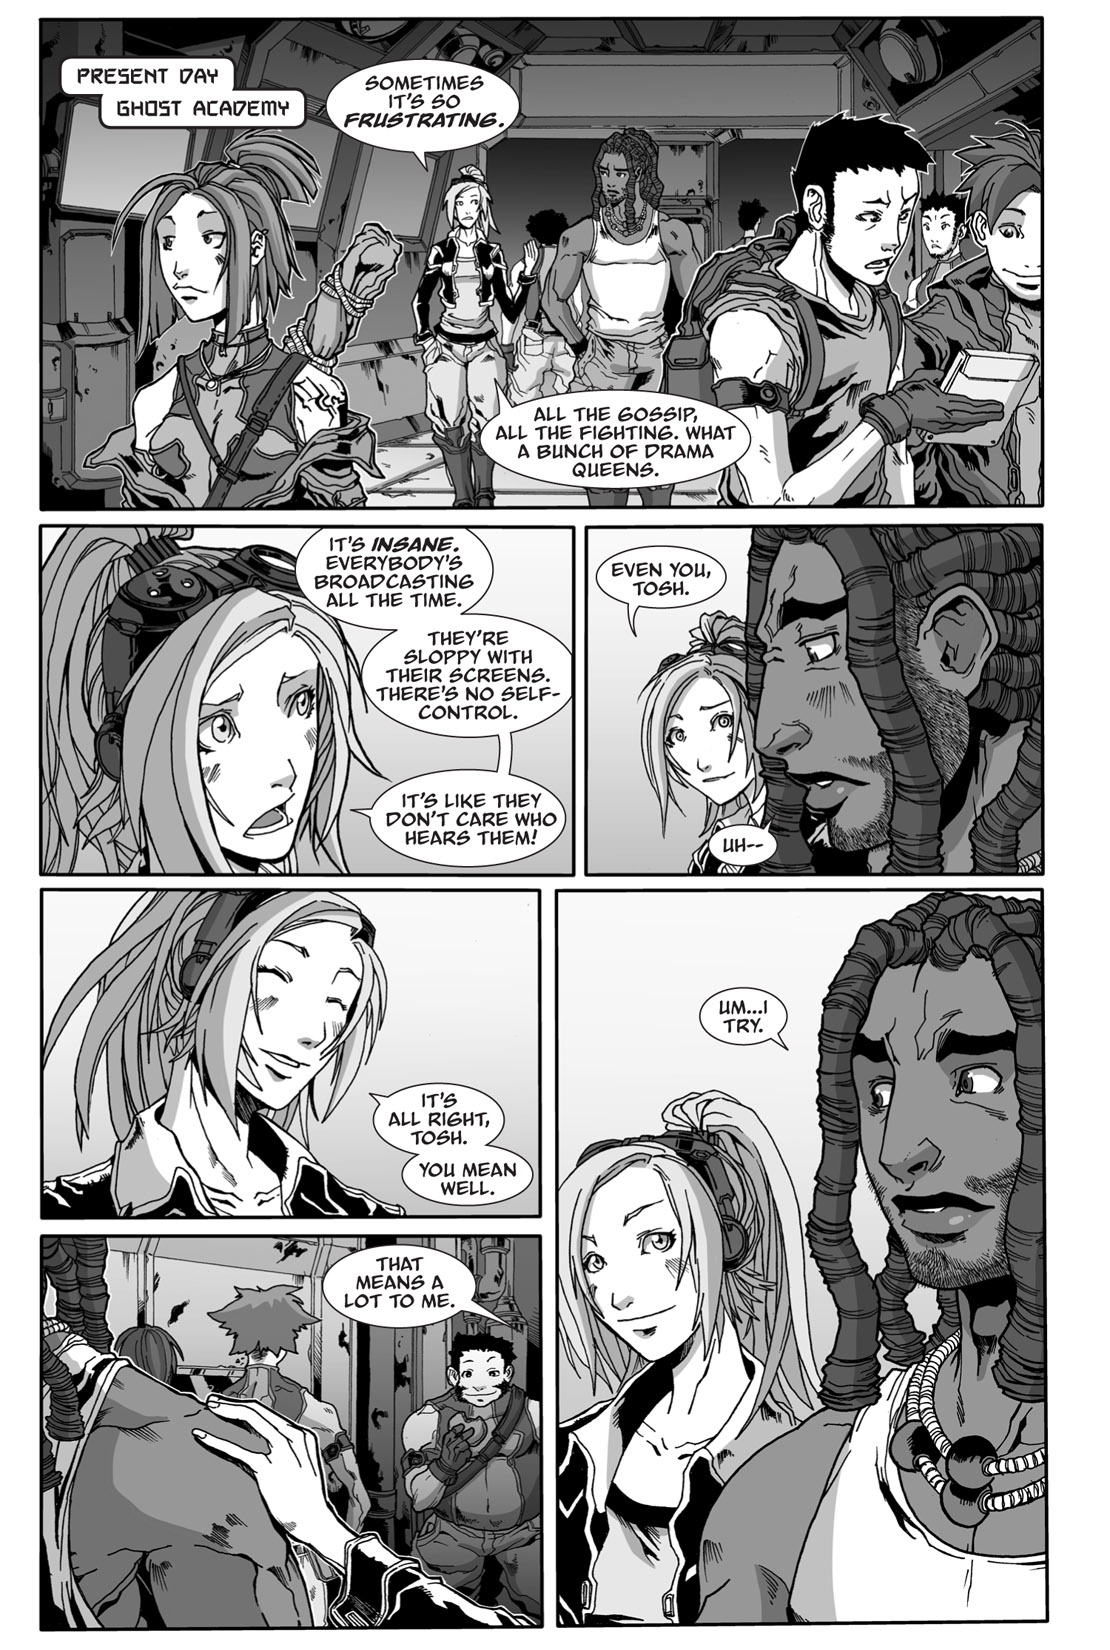 Read online StarCraft: Ghost Academy comic -  Issue # TPB 2 - 57